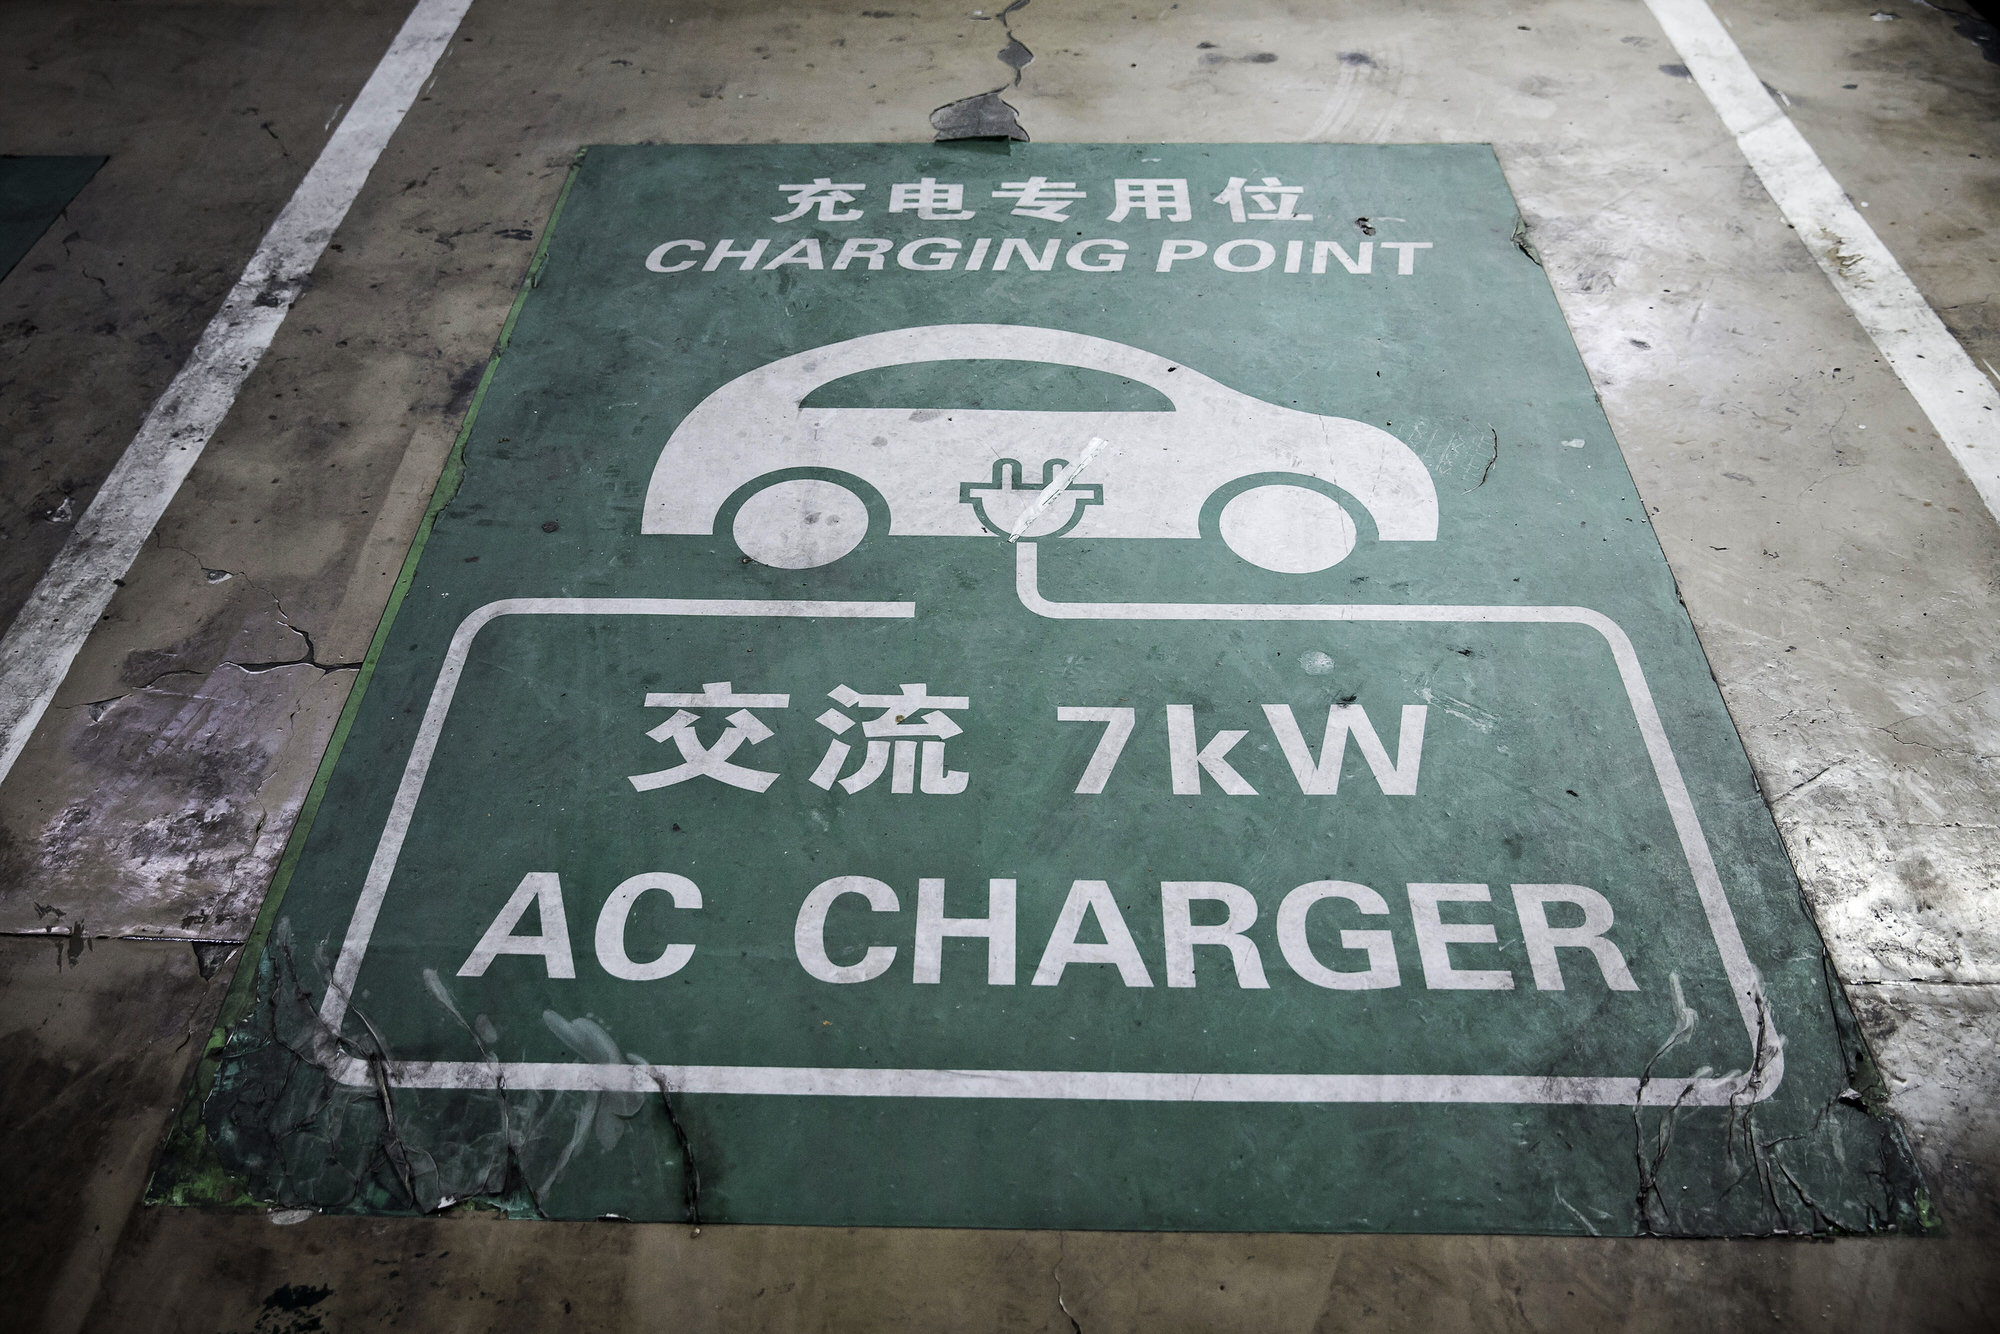 Signage for a parking space for an electric automobile is displayed at a charging station operated by Tellus Power Inc. at an underground parking lot in Beijing, China, on Wednesday, March 9, 2016. While air pollution in the nation's capital has improved slightly, residents still frequently don face masks to filter the smog, including during a string of days recently air quality was listed as hazardous. Photographer: Qilai Shen/Bloomberg